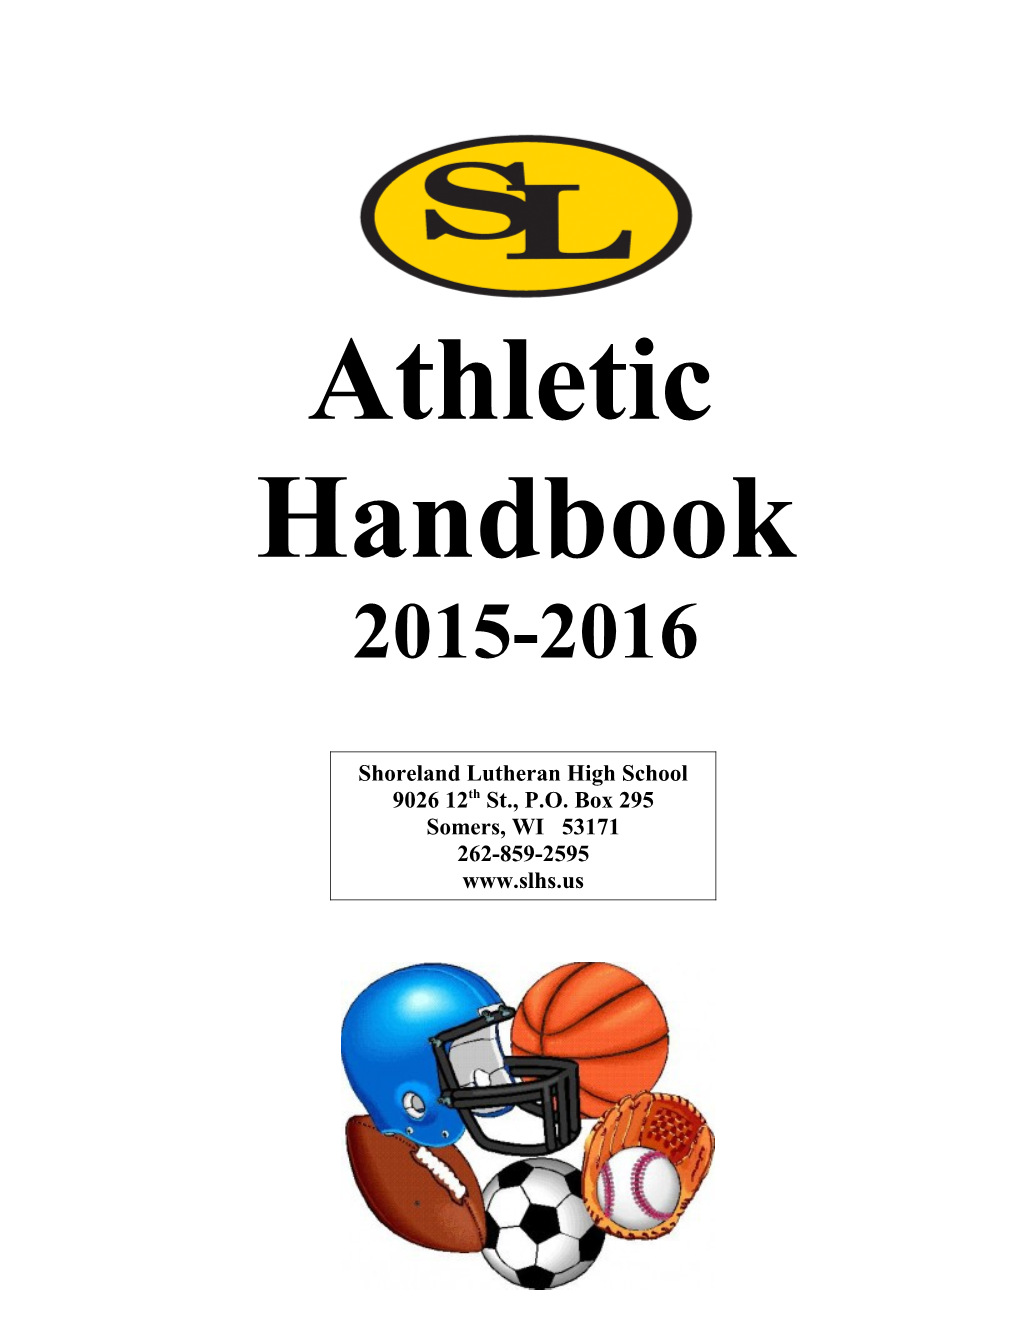 This Is the Athletic Handbook for Shorelandlutheranhigh School. the Programs We Offer At